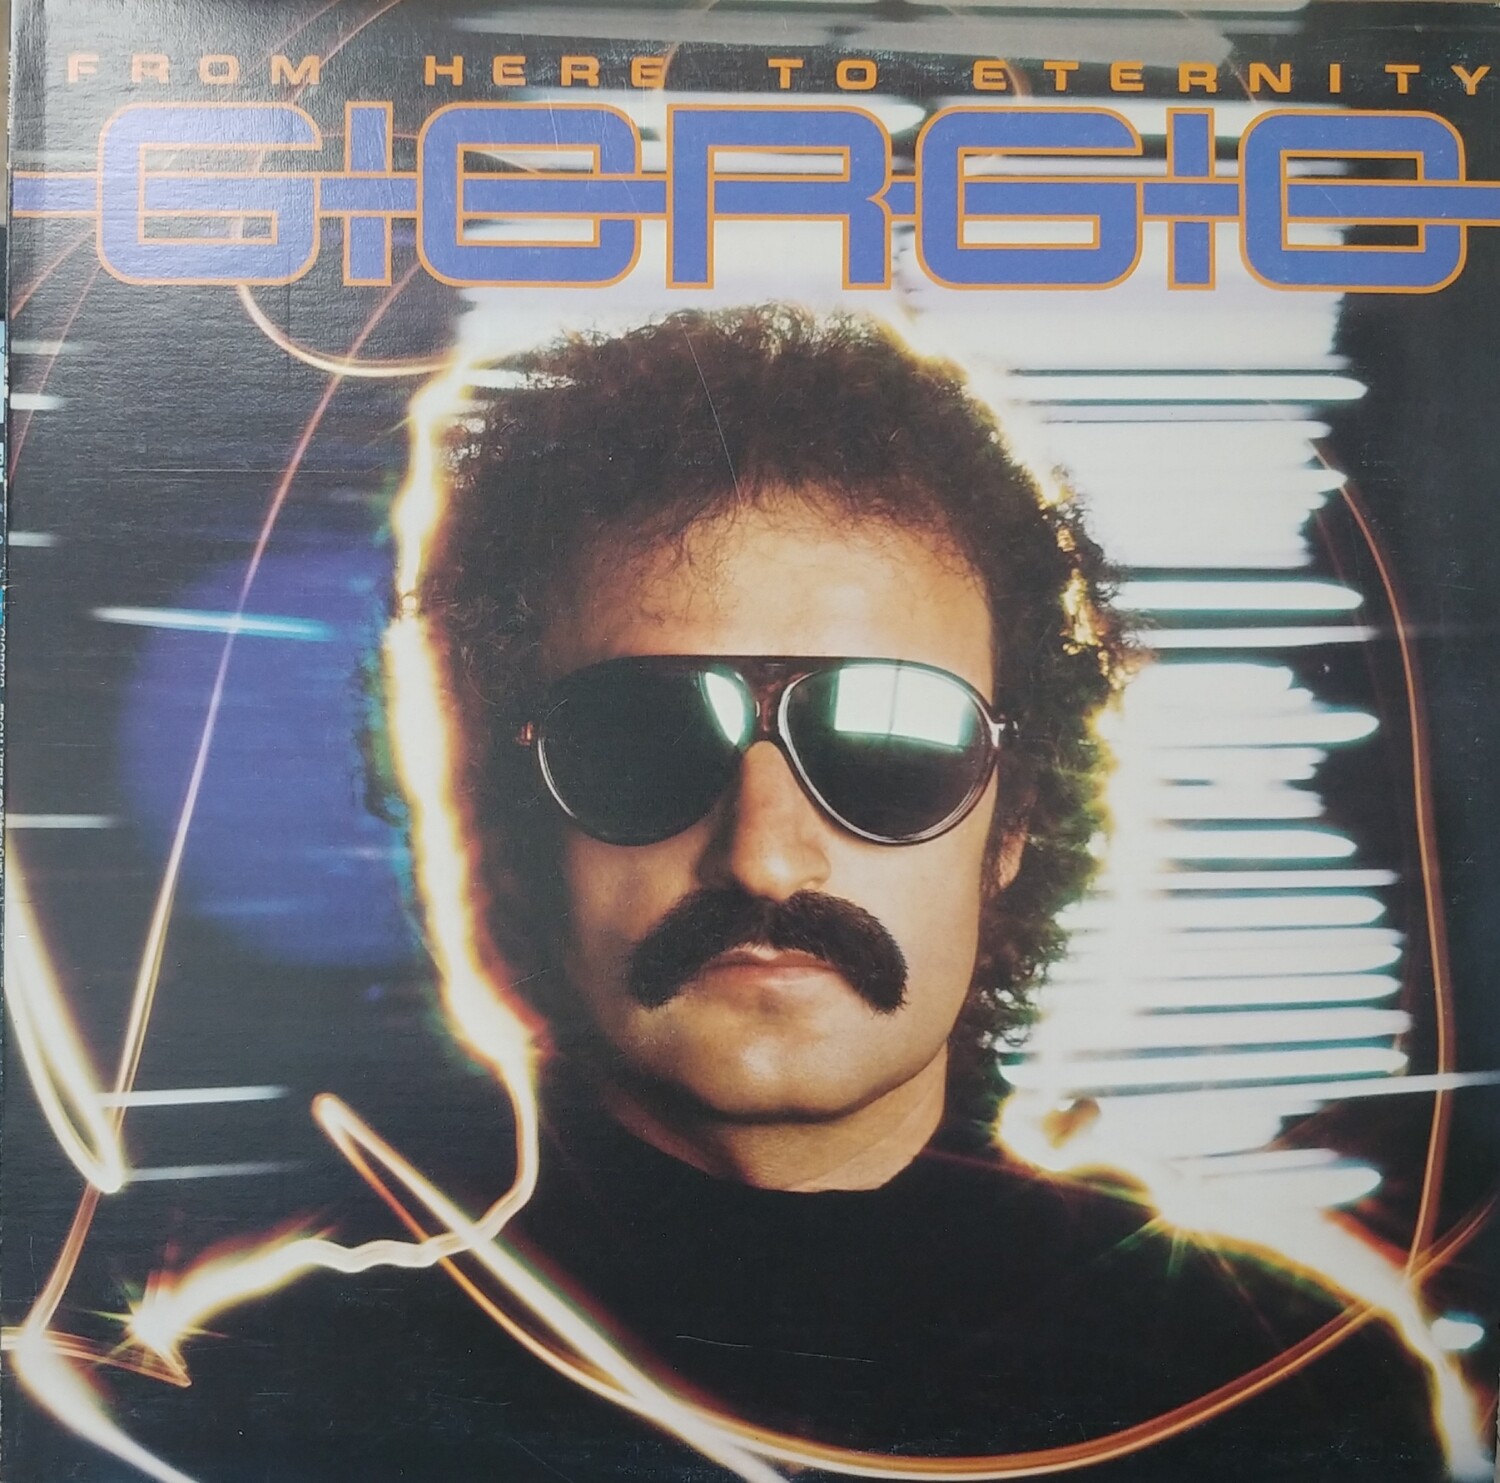 Giorgio Moroder - From here to eternity